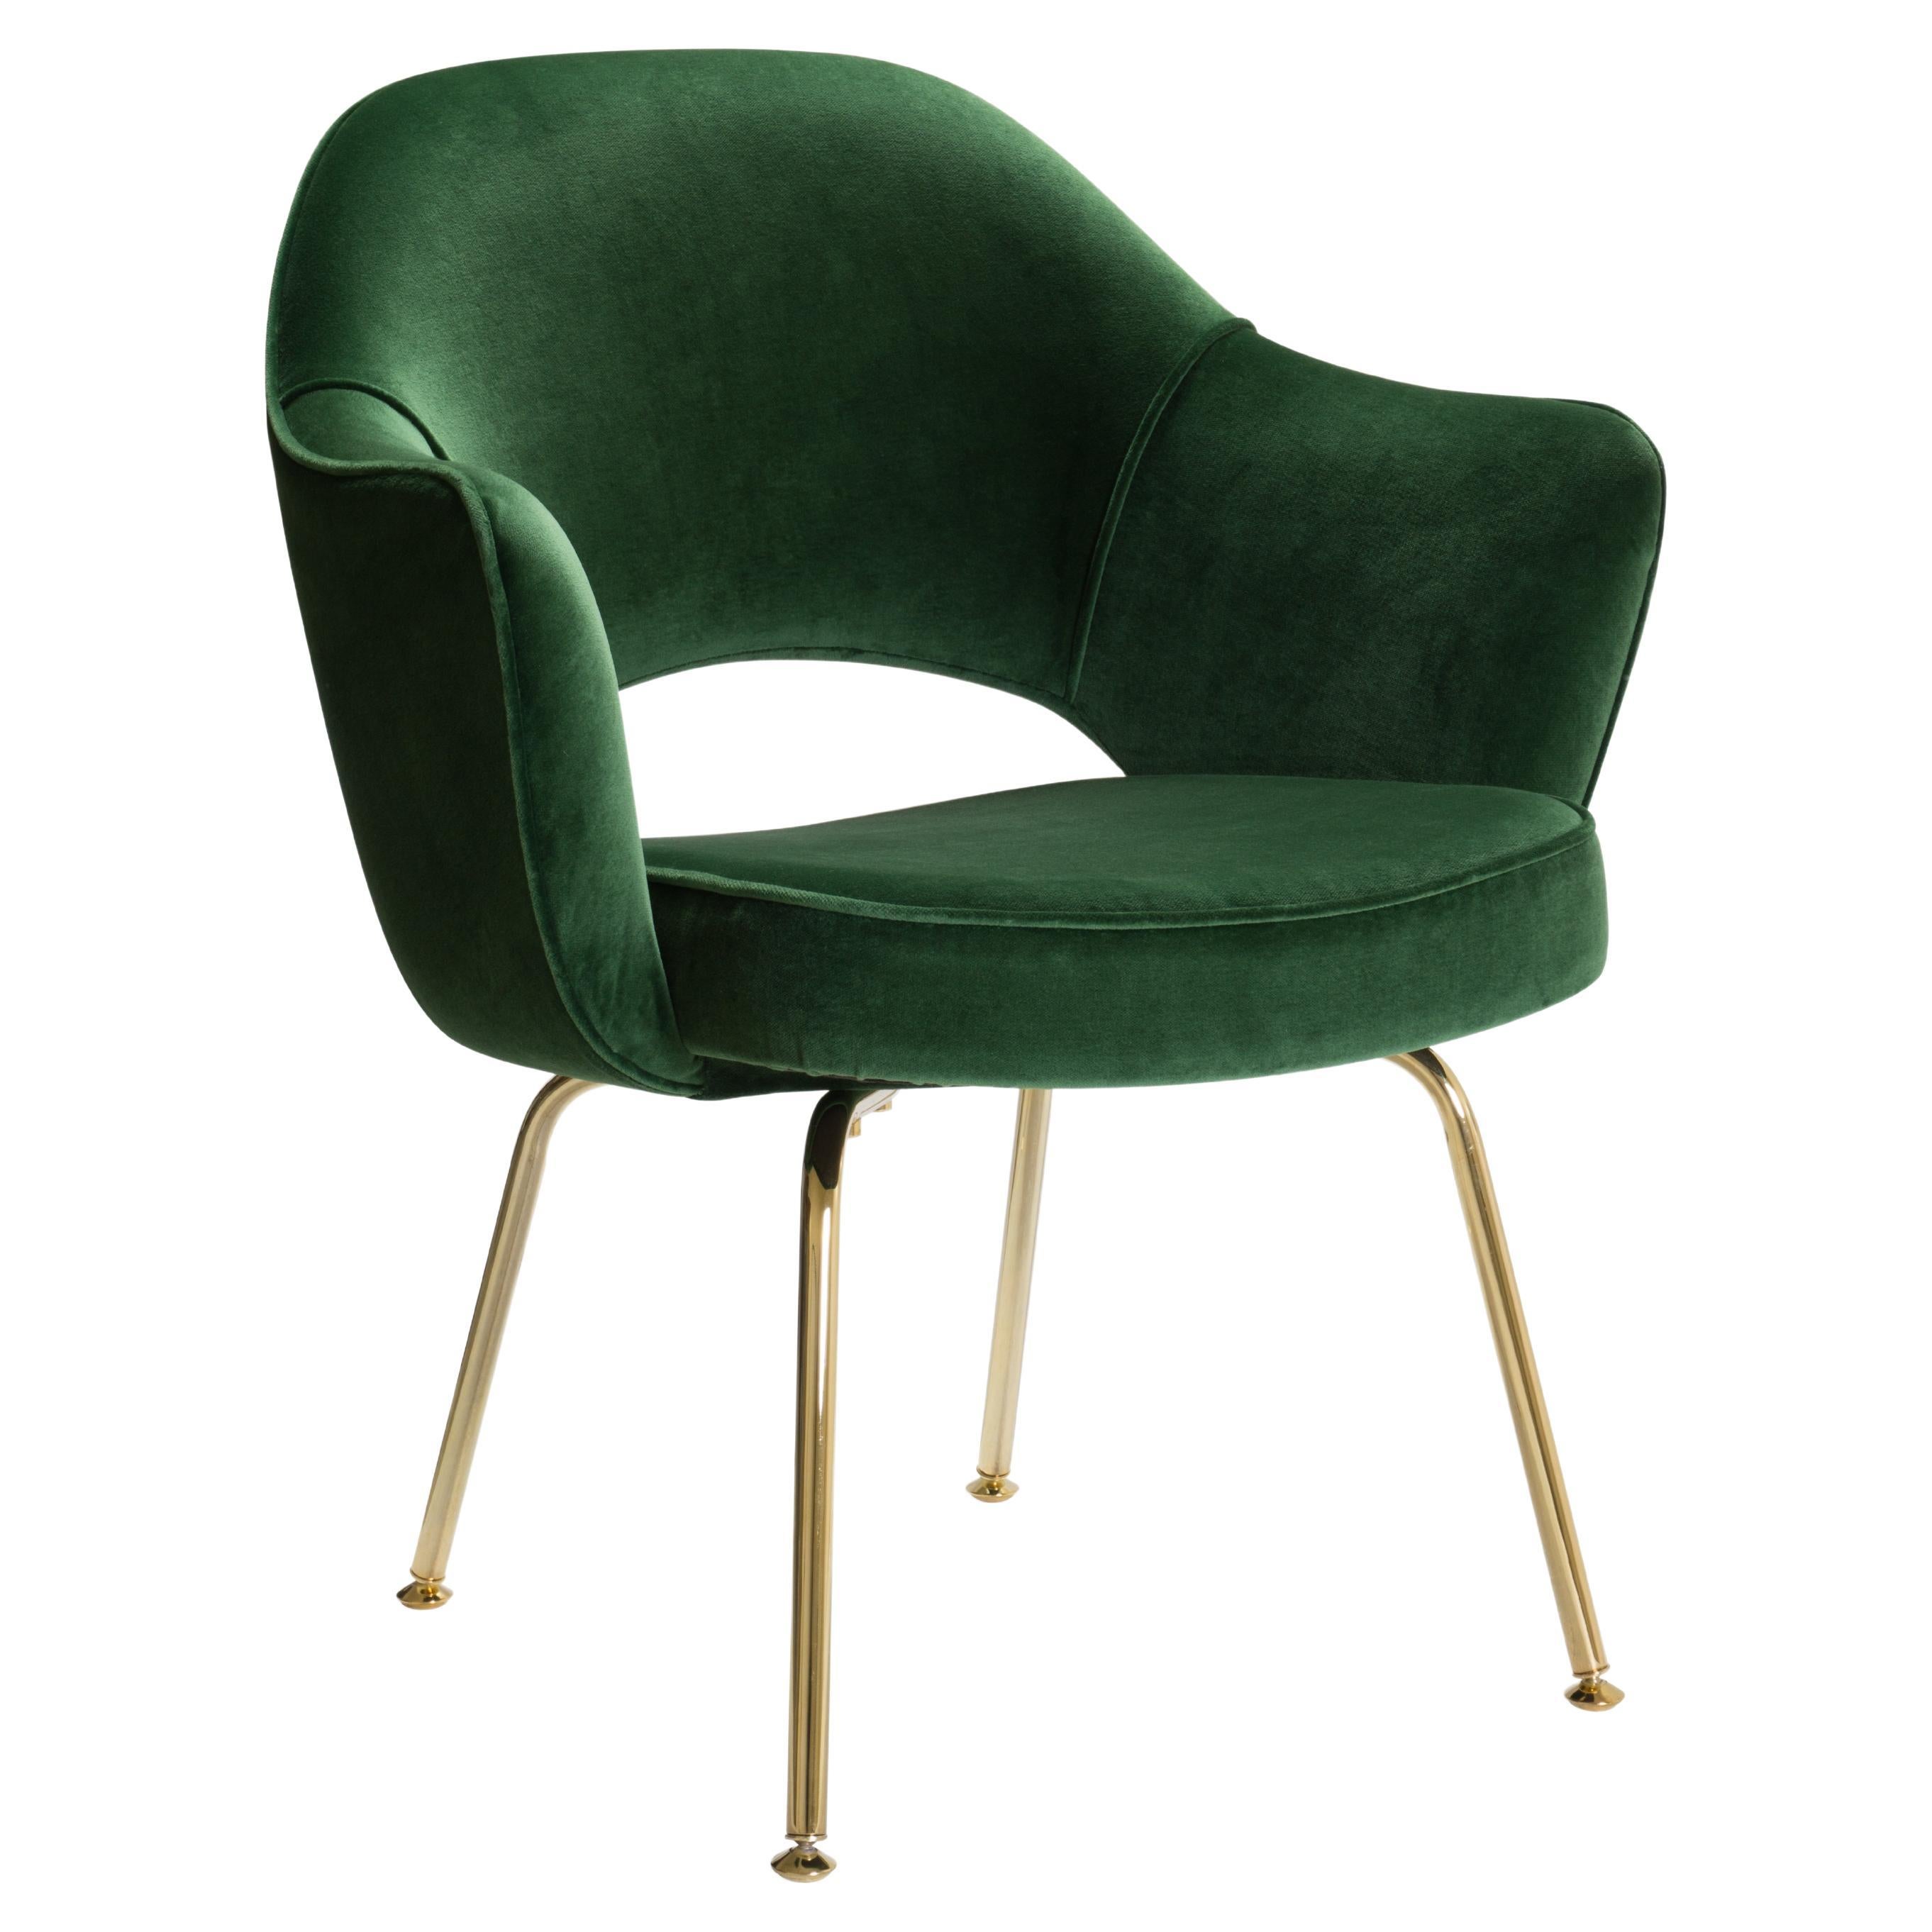 We’ve restored this set of 6 Eero Saarinen for Knoll executive chairs using a 100% Cotton Italian Velvet in the color Emerald. Skilled craftsmen have brought each chair back to life to live on for generations to come. All restoration was executed in